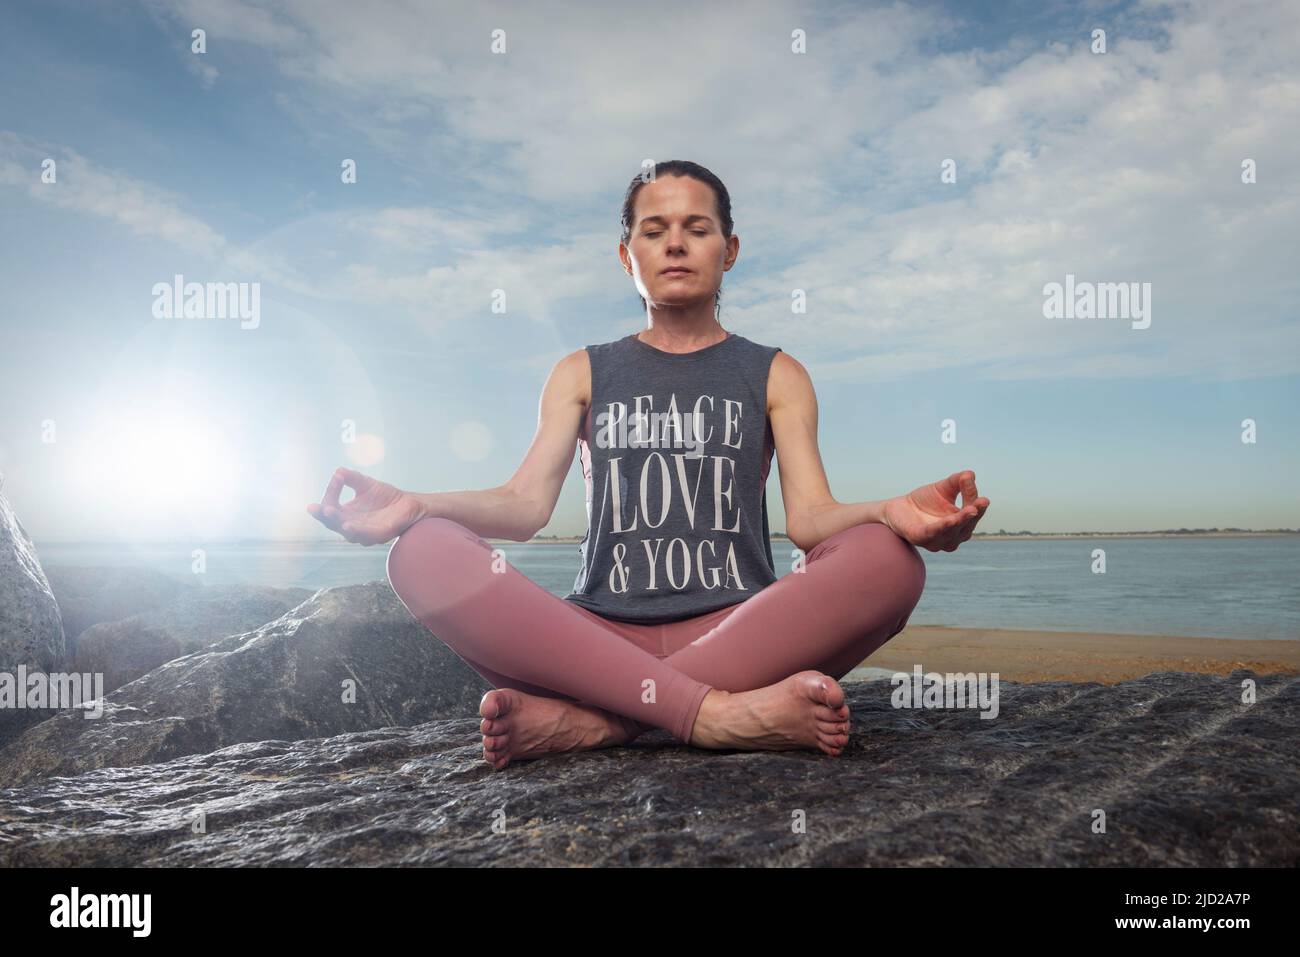 Woman sitting on rocks by the sea wearing a t shirt with 'peace love and yoga' slogan on it. Stock Photo